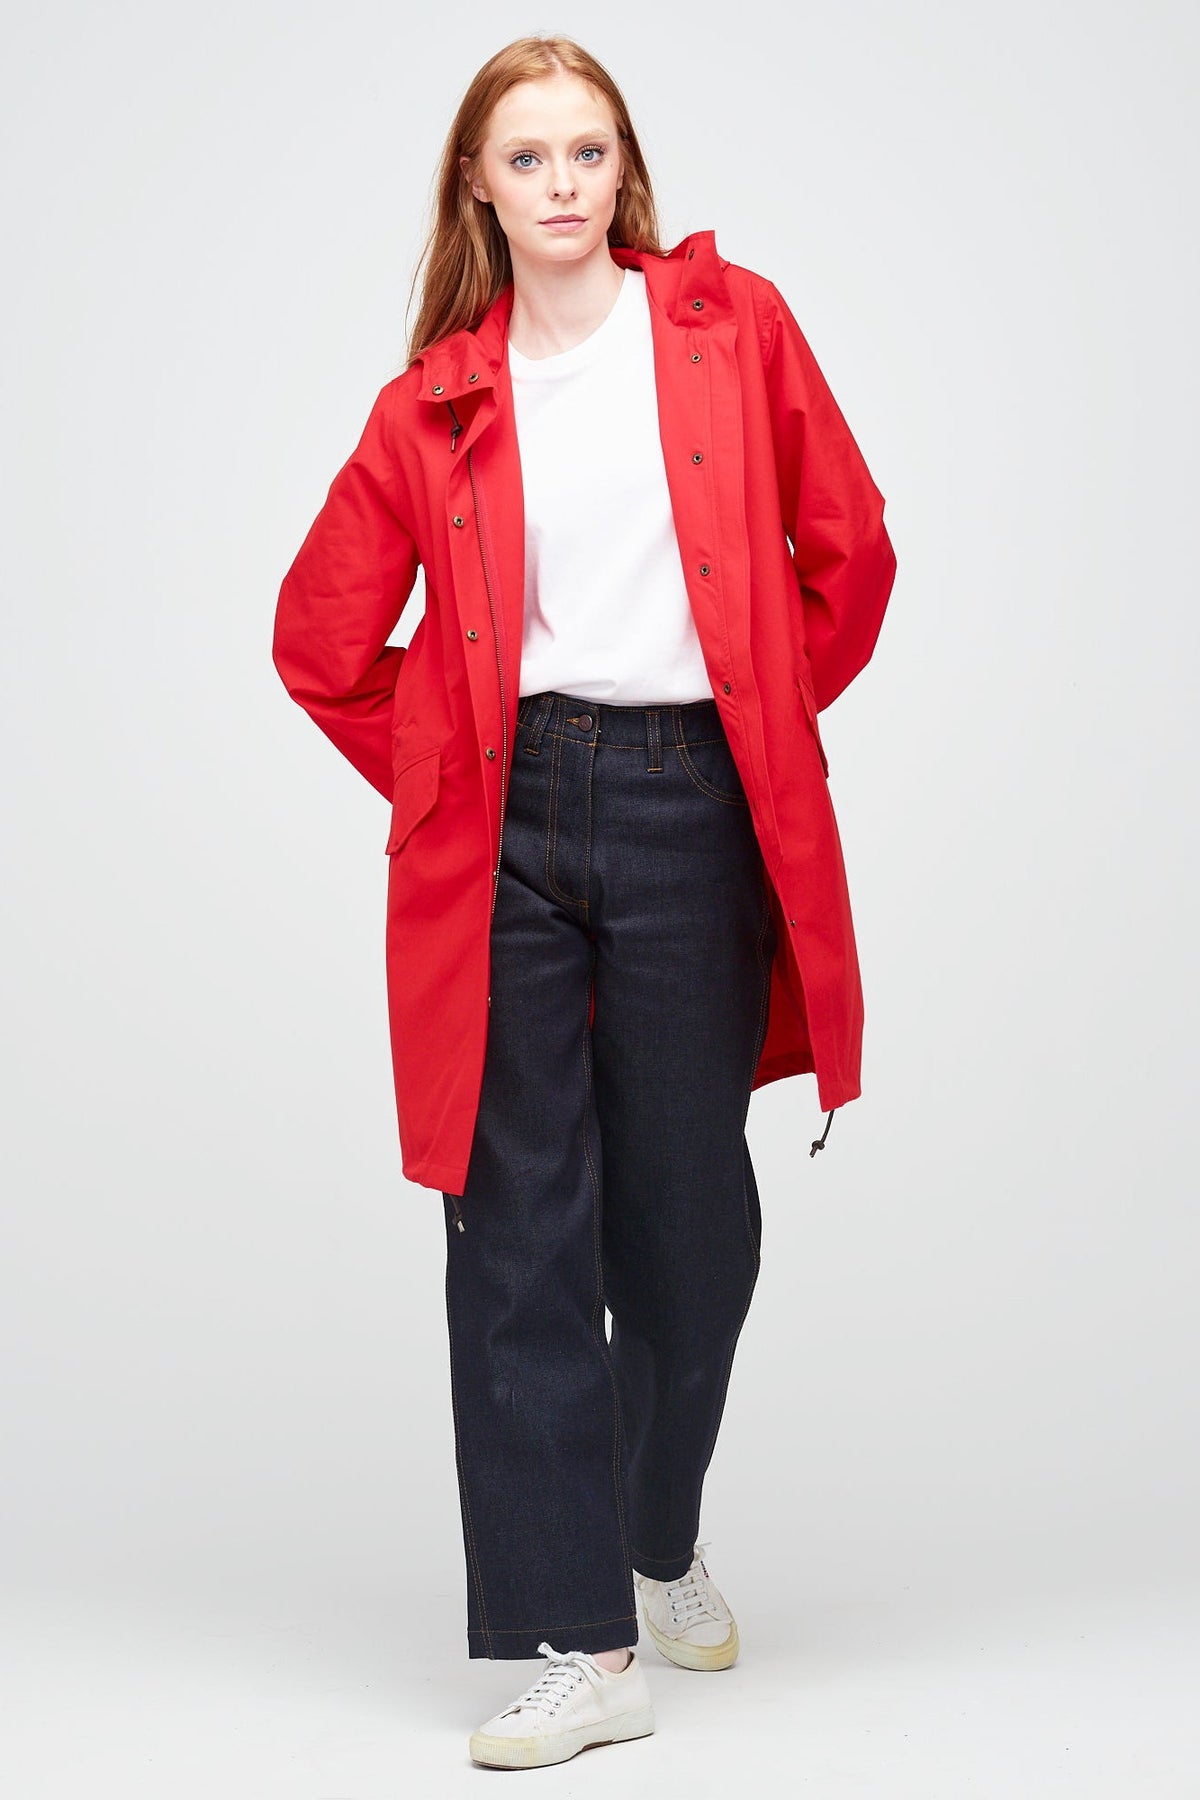 
            A young, white female model with ginger hair wearing an unzipped long red parka. The parka is styled with indigo jeans and a white trainer.